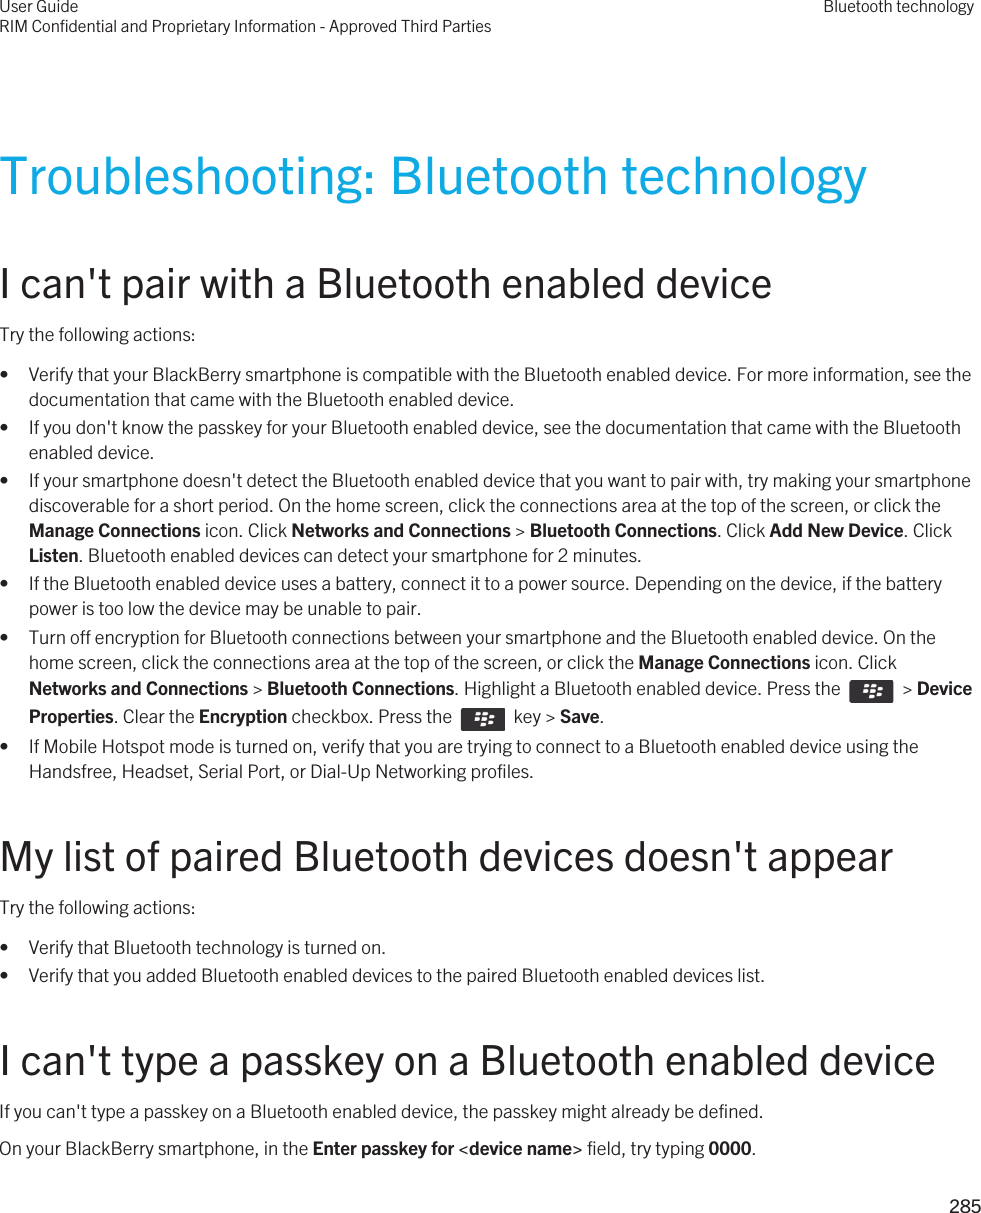 Troubleshooting: Bluetooth technologyI can&apos;t pair with a Bluetooth enabled deviceTry the following actions:• Verify that your BlackBerry smartphone is compatible with the Bluetooth enabled device. For more information, see the documentation that came with the Bluetooth enabled device.• If you don&apos;t know the passkey for your Bluetooth enabled device, see the documentation that came with the Bluetooth enabled device.• If your smartphone doesn&apos;t detect the Bluetooth enabled device that you want to pair with, try making your smartphone discoverable for a short period. On the home screen, click the connections area at the top of the screen, or click the Manage Connections icon. Click Networks and Connections &gt; Bluetooth Connections. Click Add New Device. Click Listen. Bluetooth enabled devices can detect your smartphone for 2 minutes.• If the Bluetooth enabled device uses a battery, connect it to a power source. Depending on the device, if the battery power is too low the device may be unable to pair.• Turn off encryption for Bluetooth connections between your smartphone and the Bluetooth enabled device. On the home screen, click the connections area at the top of the screen, or click the Manage Connections icon. Click Networks and Connections &gt; Bluetooth Connections. Highlight a Bluetooth enabled device. Press the    &gt; Device Properties. Clear the Encryption checkbox. Press the    key &gt; Save.• If Mobile Hotspot mode is turned on, verify that you are trying to connect to a Bluetooth enabled device using the Handsfree, Headset, Serial Port, or Dial-Up Networking profiles.My list of paired Bluetooth devices doesn&apos;t appearTry the following actions:• Verify that Bluetooth technology is turned on.• Verify that you added Bluetooth enabled devices to the paired Bluetooth enabled devices list.I can&apos;t type a passkey on a Bluetooth enabled deviceIf you can&apos;t type a passkey on a Bluetooth enabled device, the passkey might already be defined.On your BlackBerry smartphone, in the Enter passkey for &lt;device name&gt; field, try typing 0000.User GuideRIM Confidential and Proprietary Information - Approved Third PartiesBluetooth technology285 